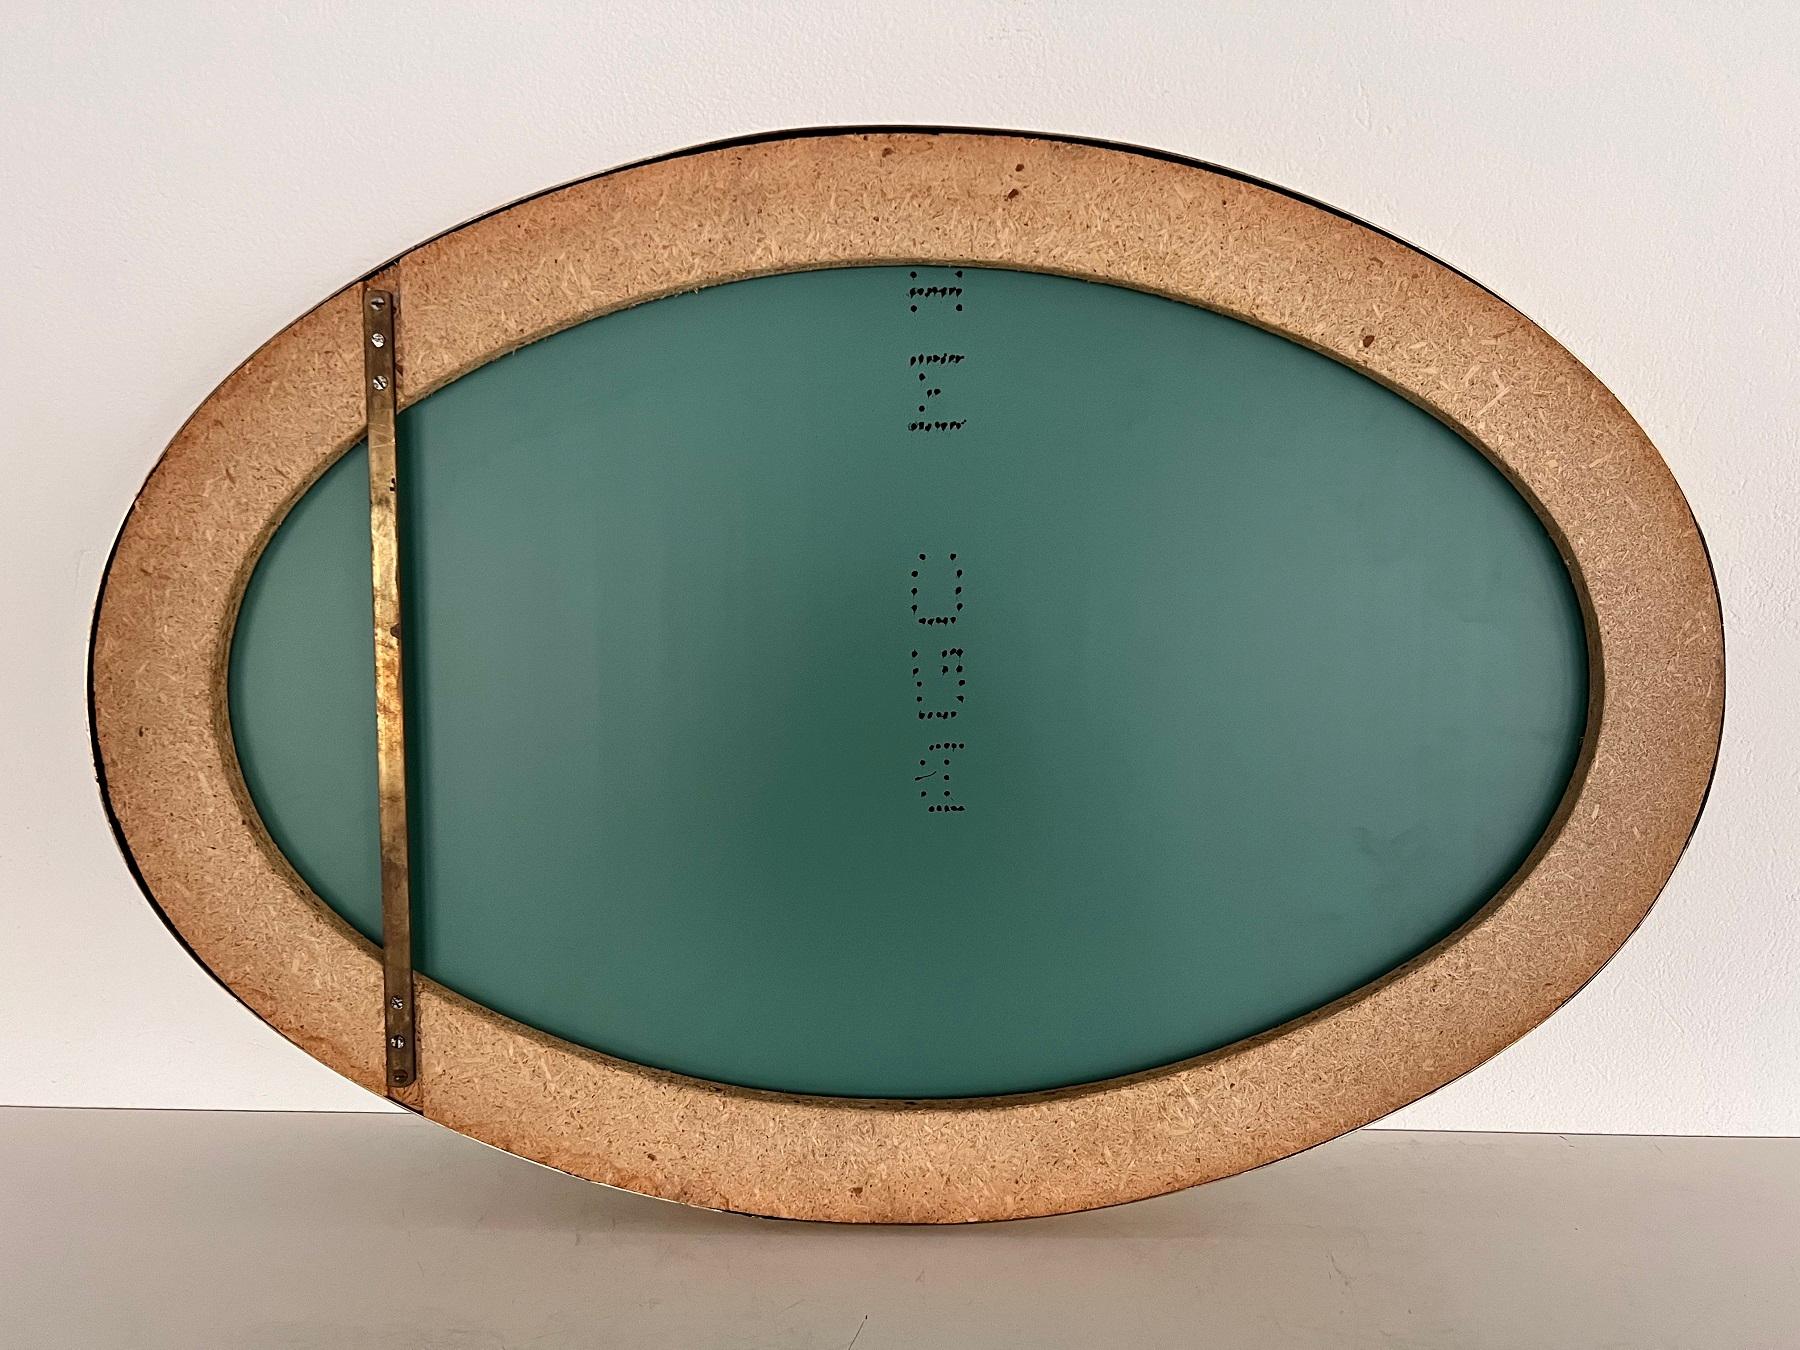 Italian Midcentury Vintage Wall Mirror with Brass Frame and Decor, 1970s For Sale 10